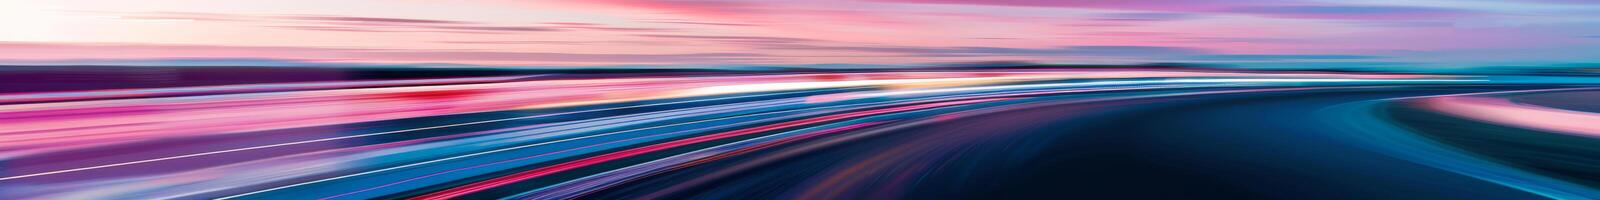 Speedway Circuit in Early Morning with Vibrant Pink and Blue Light Trails photo